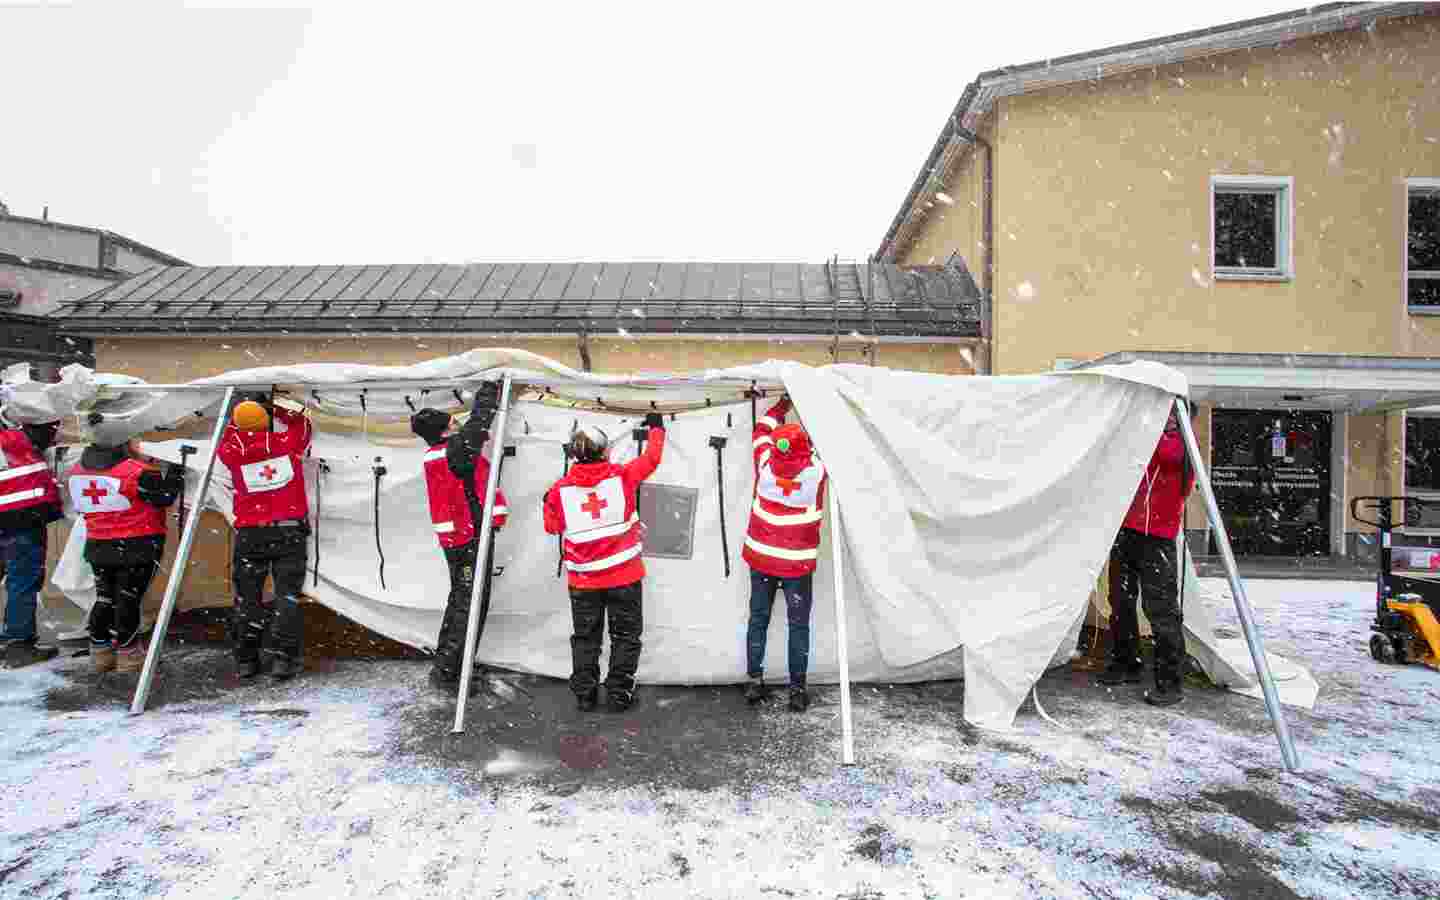 On request, the Finnish Red Cross provides hospitals with Triage units to enhance the capacity to assess people’s need for treatment. 